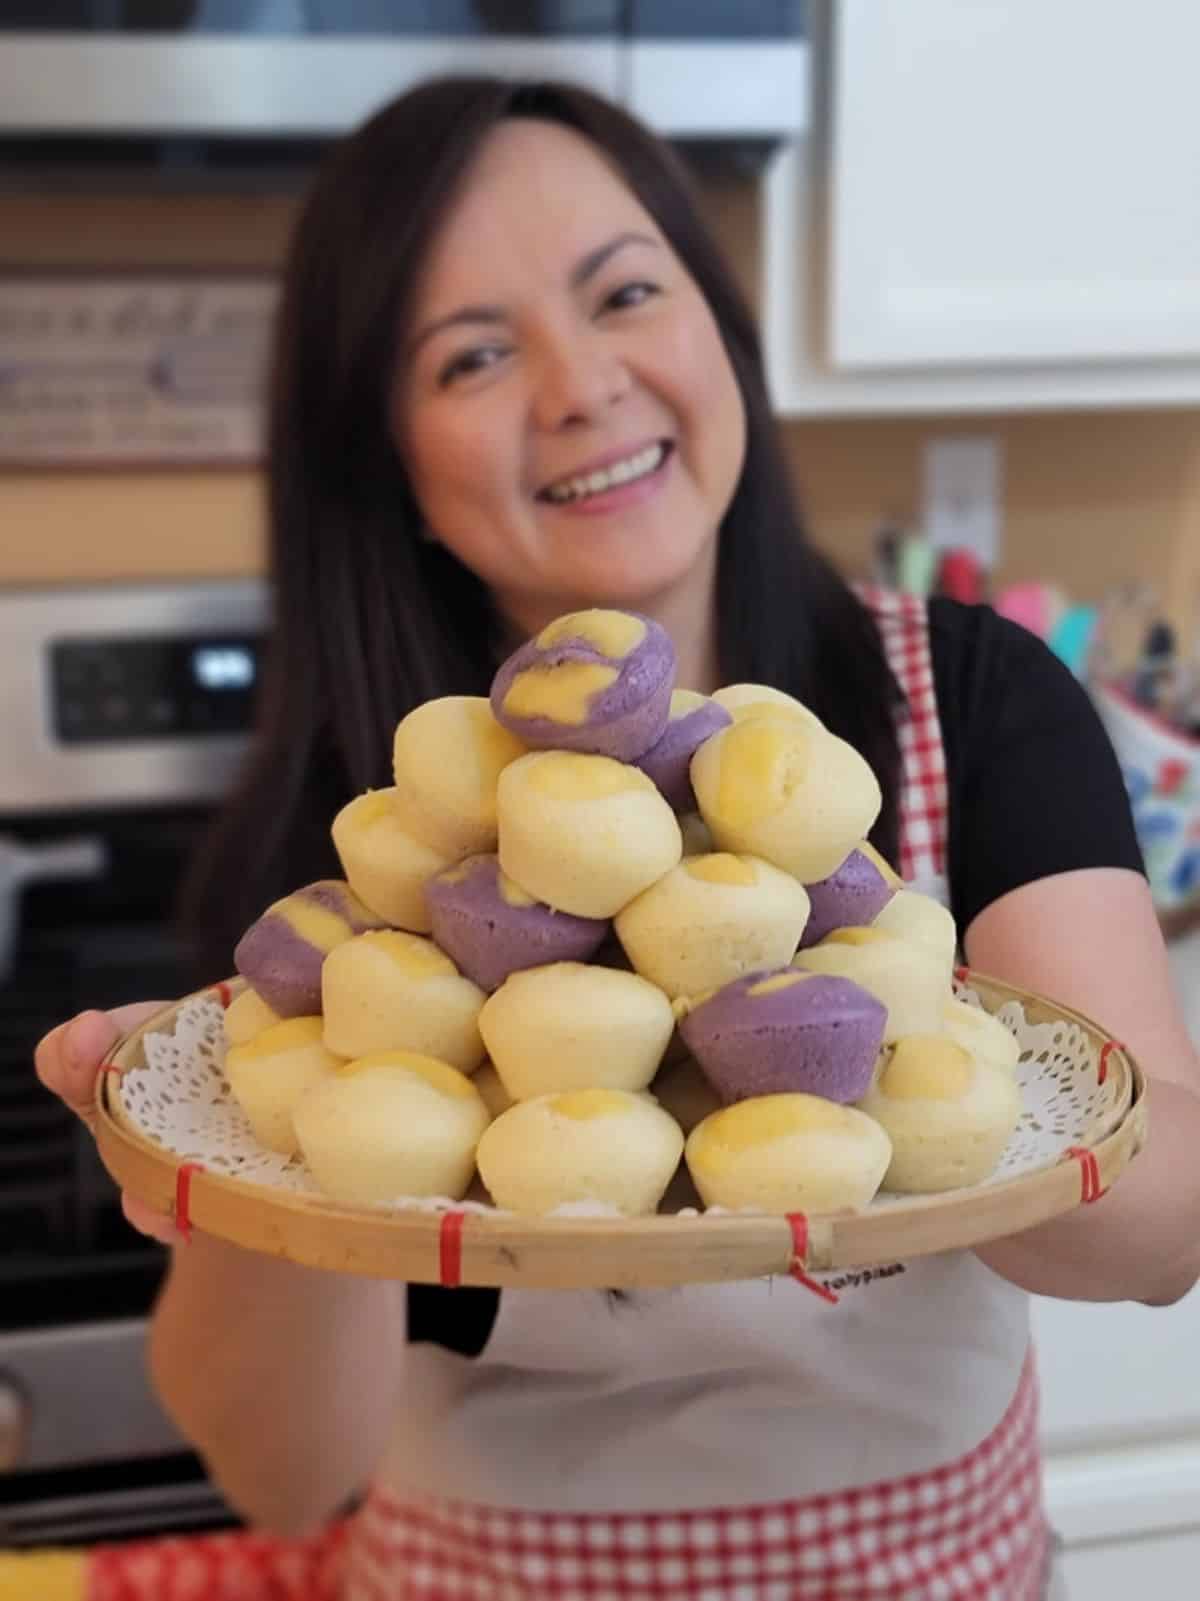 Puto Filipino Desserts stacked on a wooden tray held by a woman.